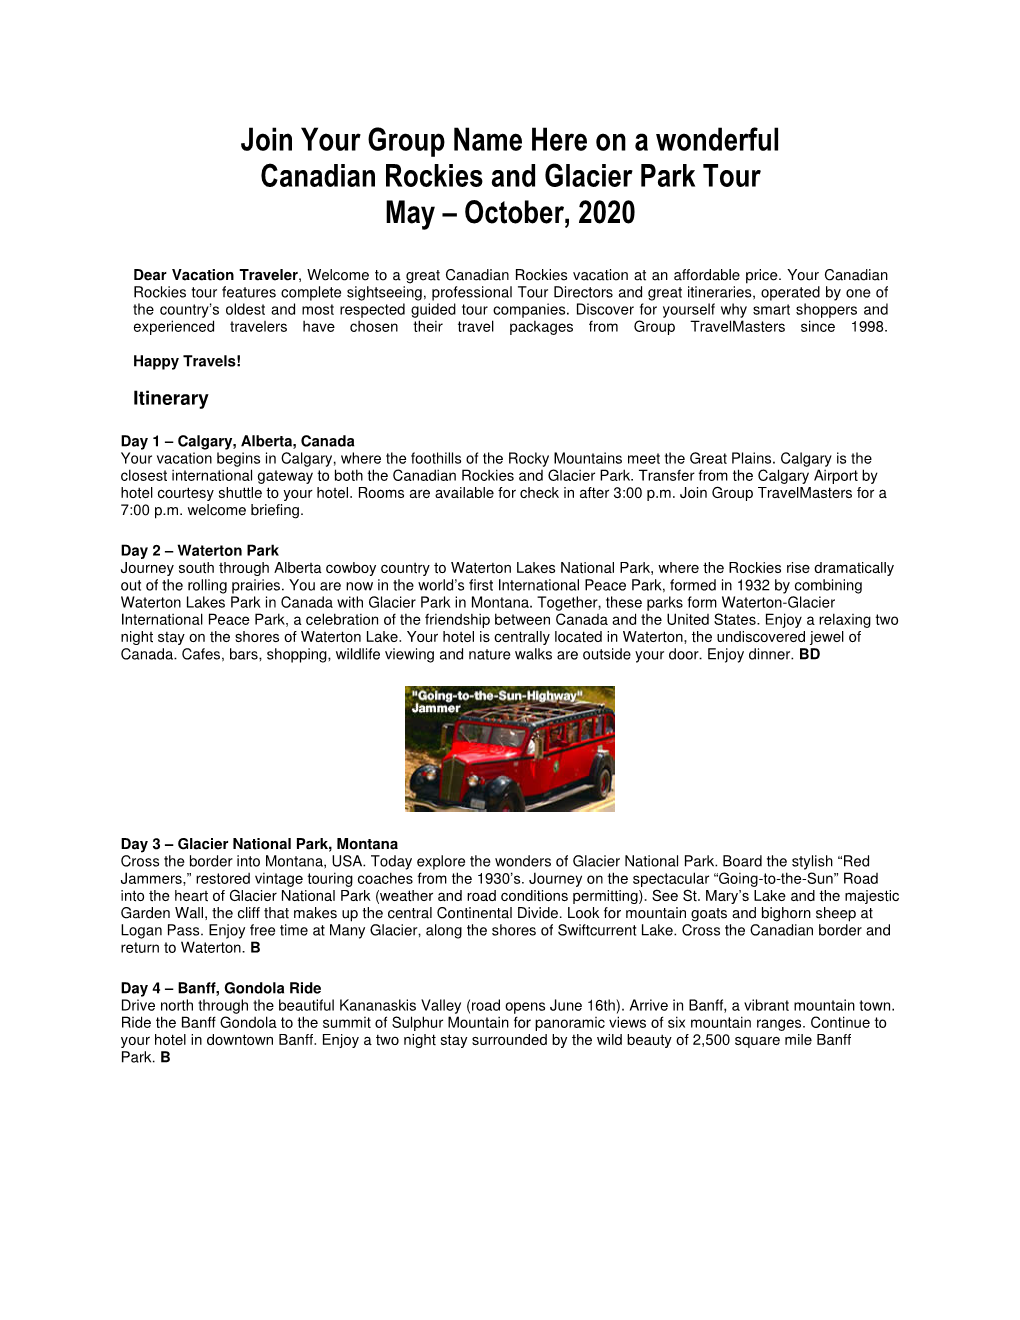 Join Your Group Name Here on a Wonderful Canadian Rockies and Glacier Park Tour May – October, 2020